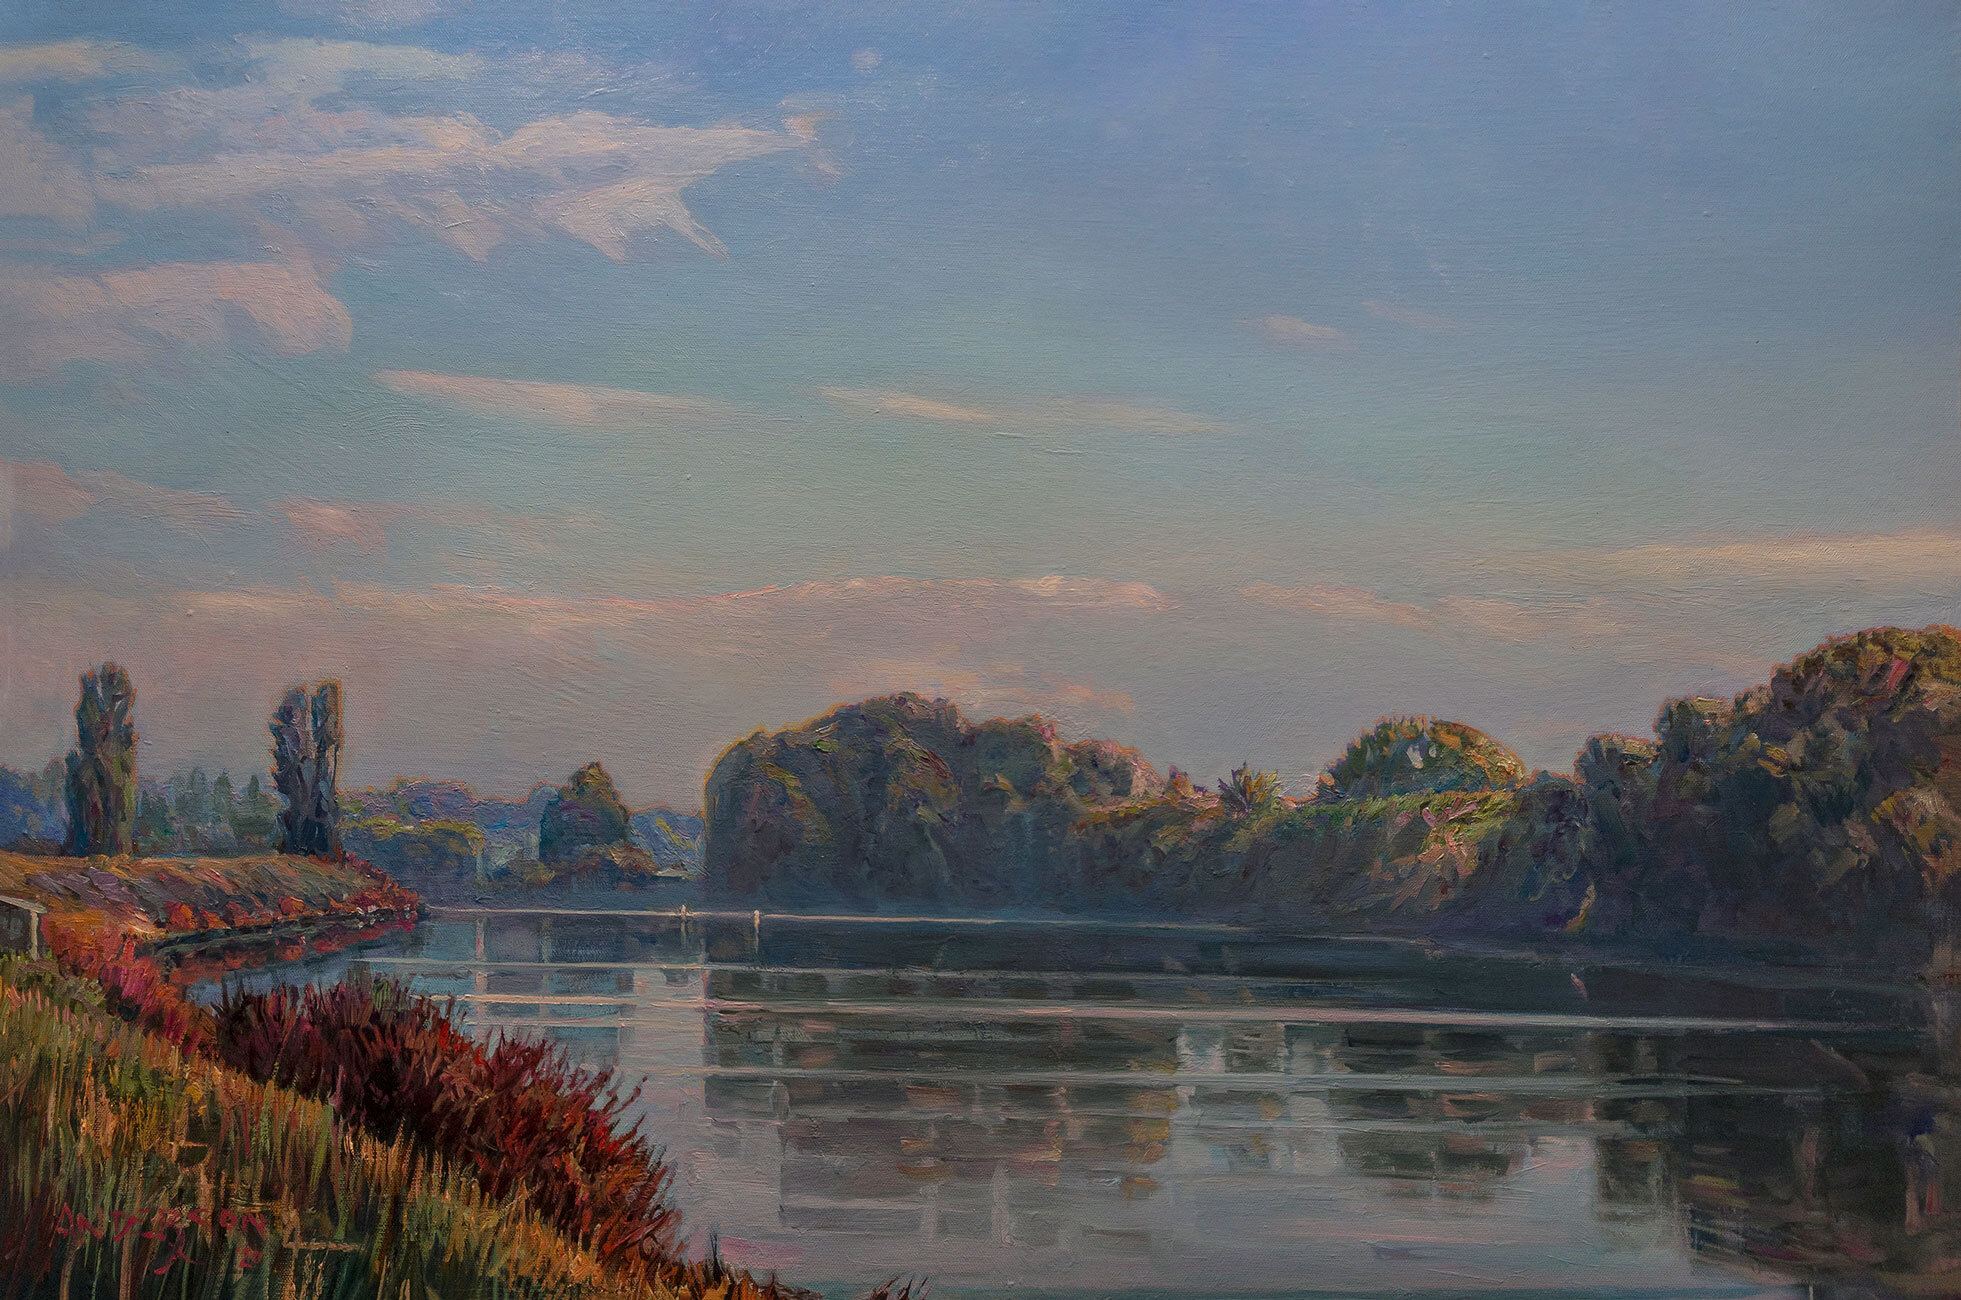 "A NEW DAY: DELTA"   24" x 36"  oil on canvas